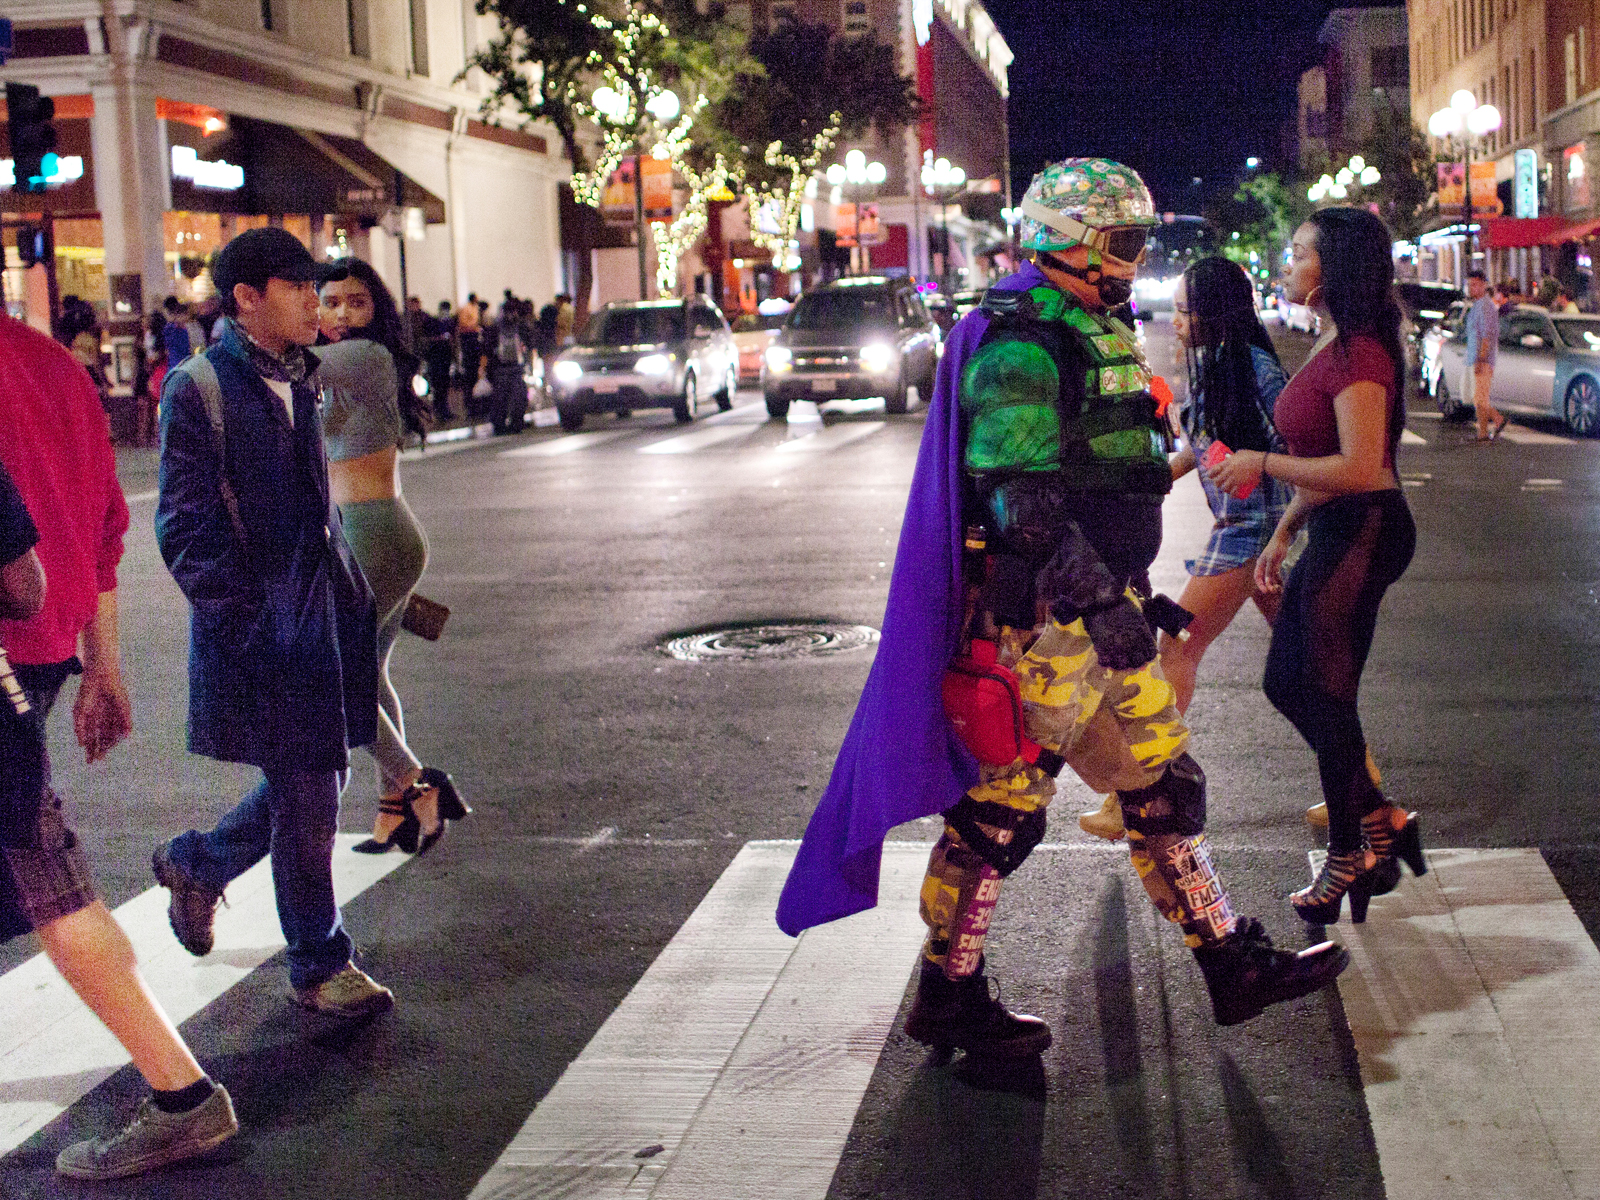 WatchDog and Mr. Xtreme on a safety patrol in San Diego's gaslamp district. The XJL is out there patrolling the streets every friday and saturday night with only very few exceptions.